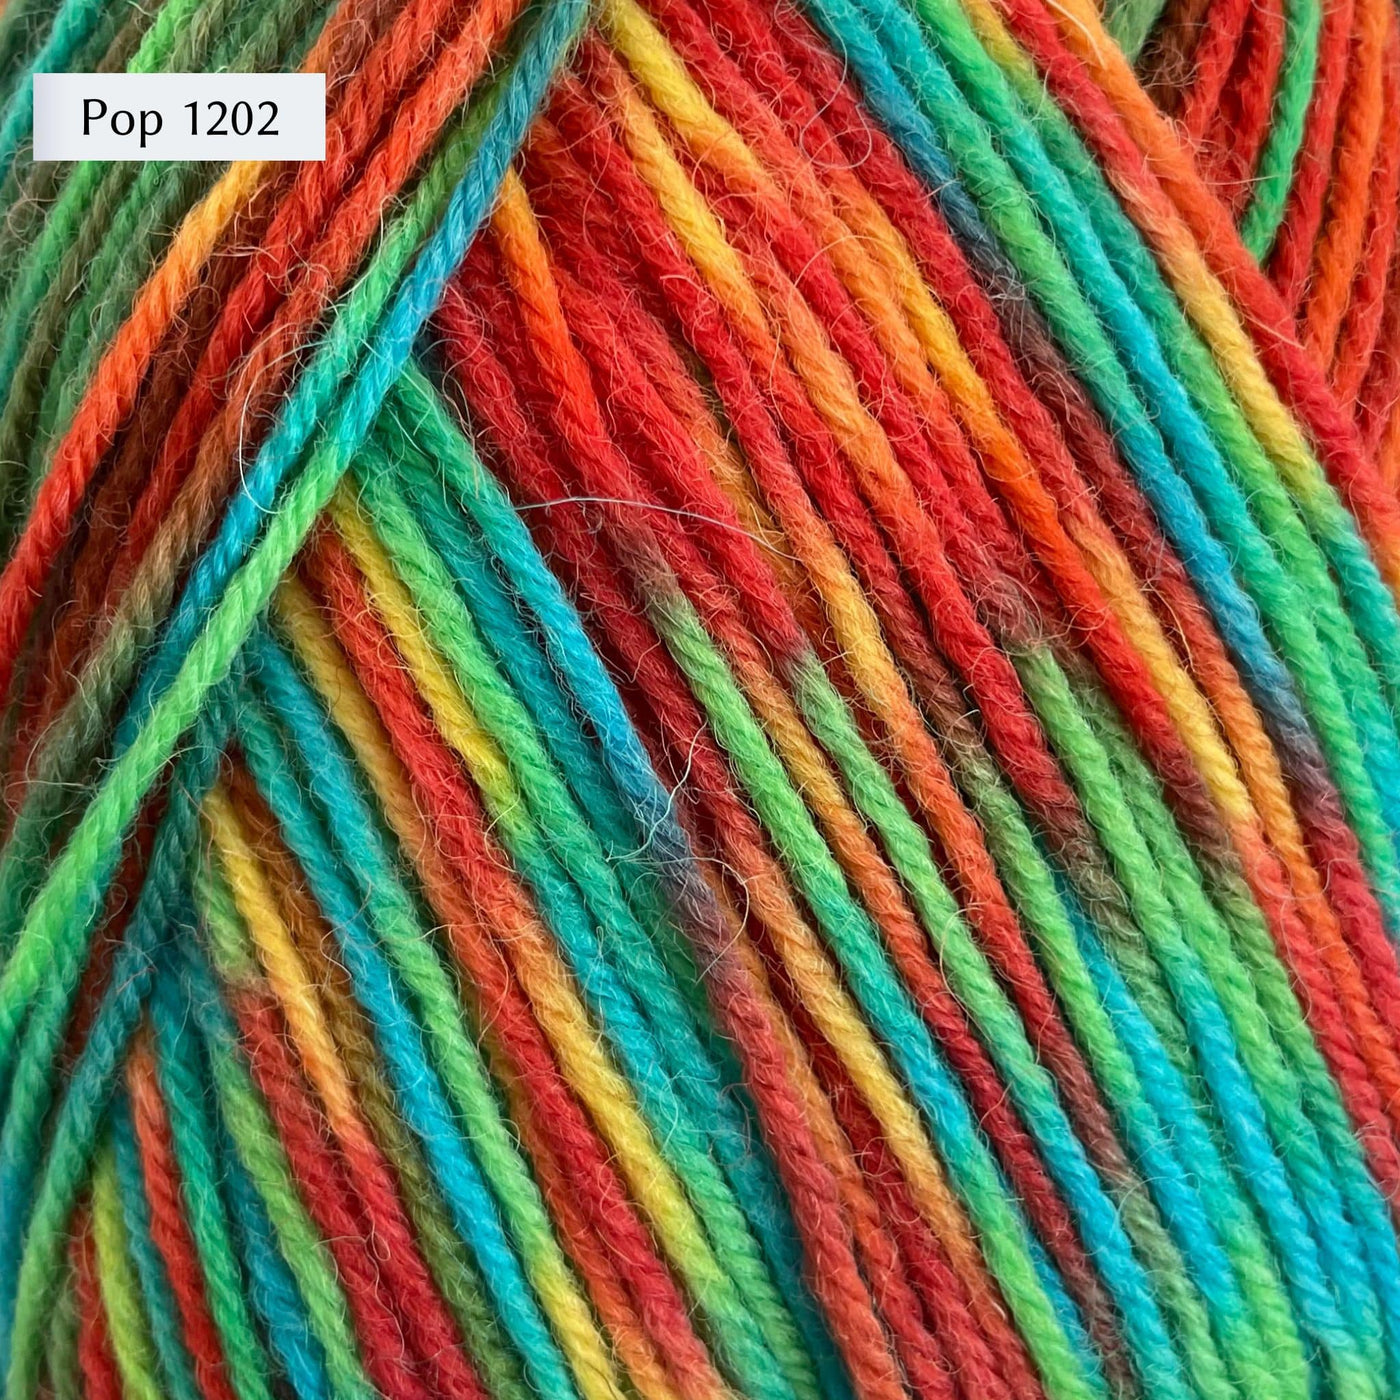 West Yorkshire Spinners (WYS) ColourLab Sock DK